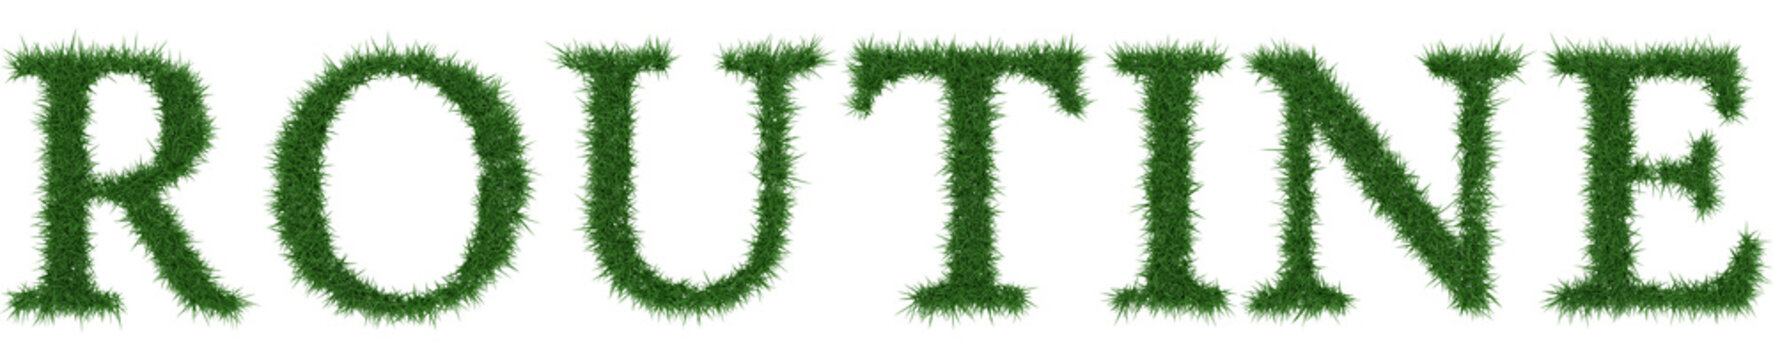 Routine - 3D rendering fresh Grass letters isolated on whhite background.